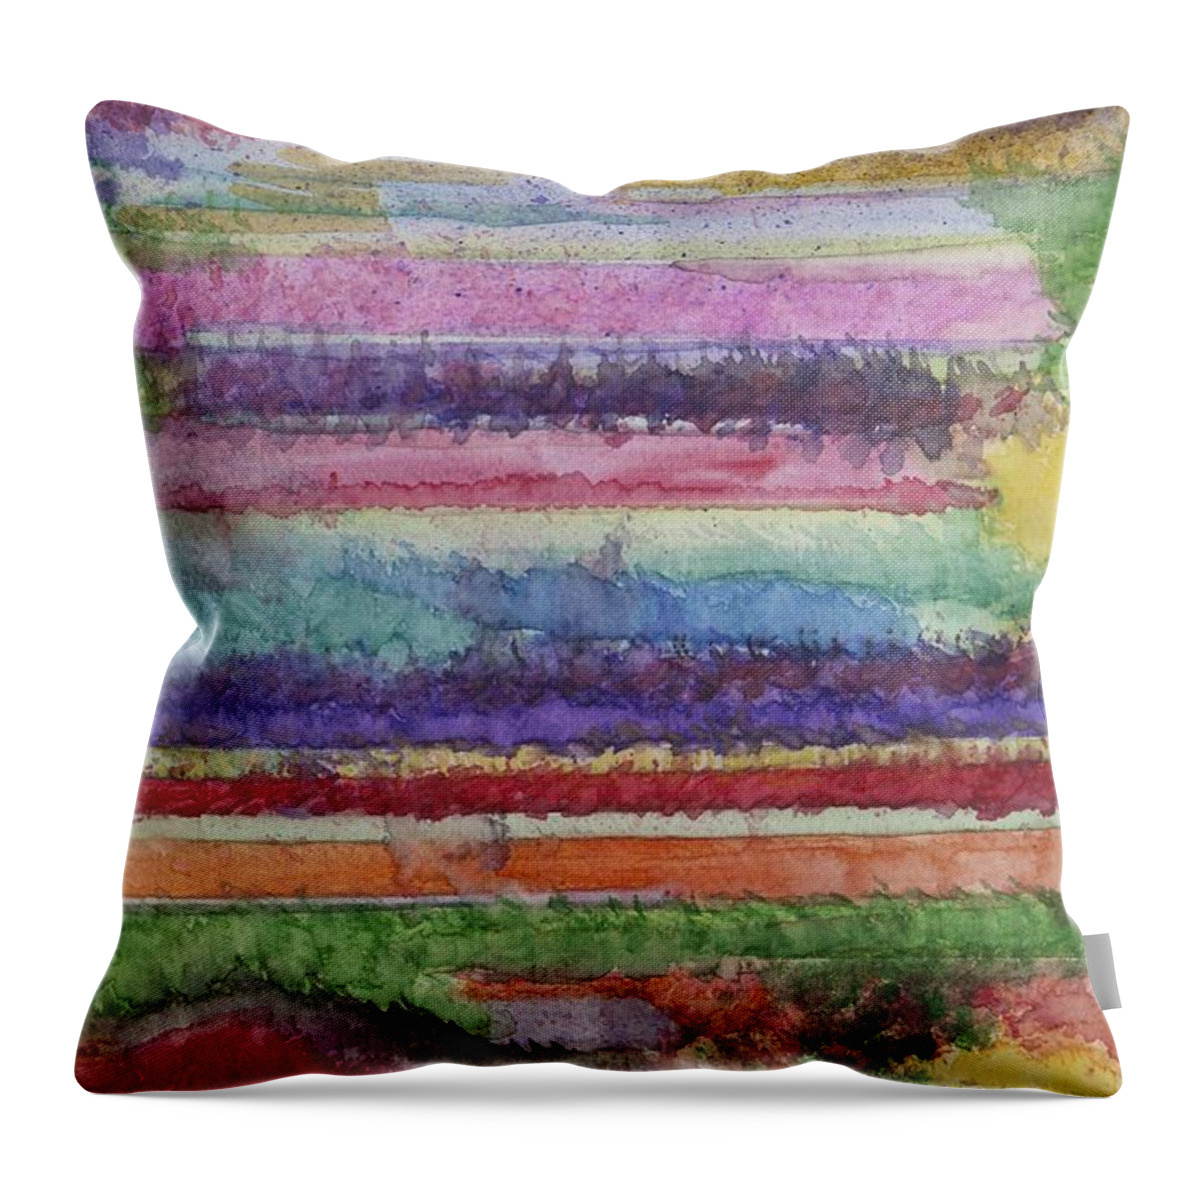 Colorful Throw Pillow featuring the painting Perspective by Jacqueline Athmann